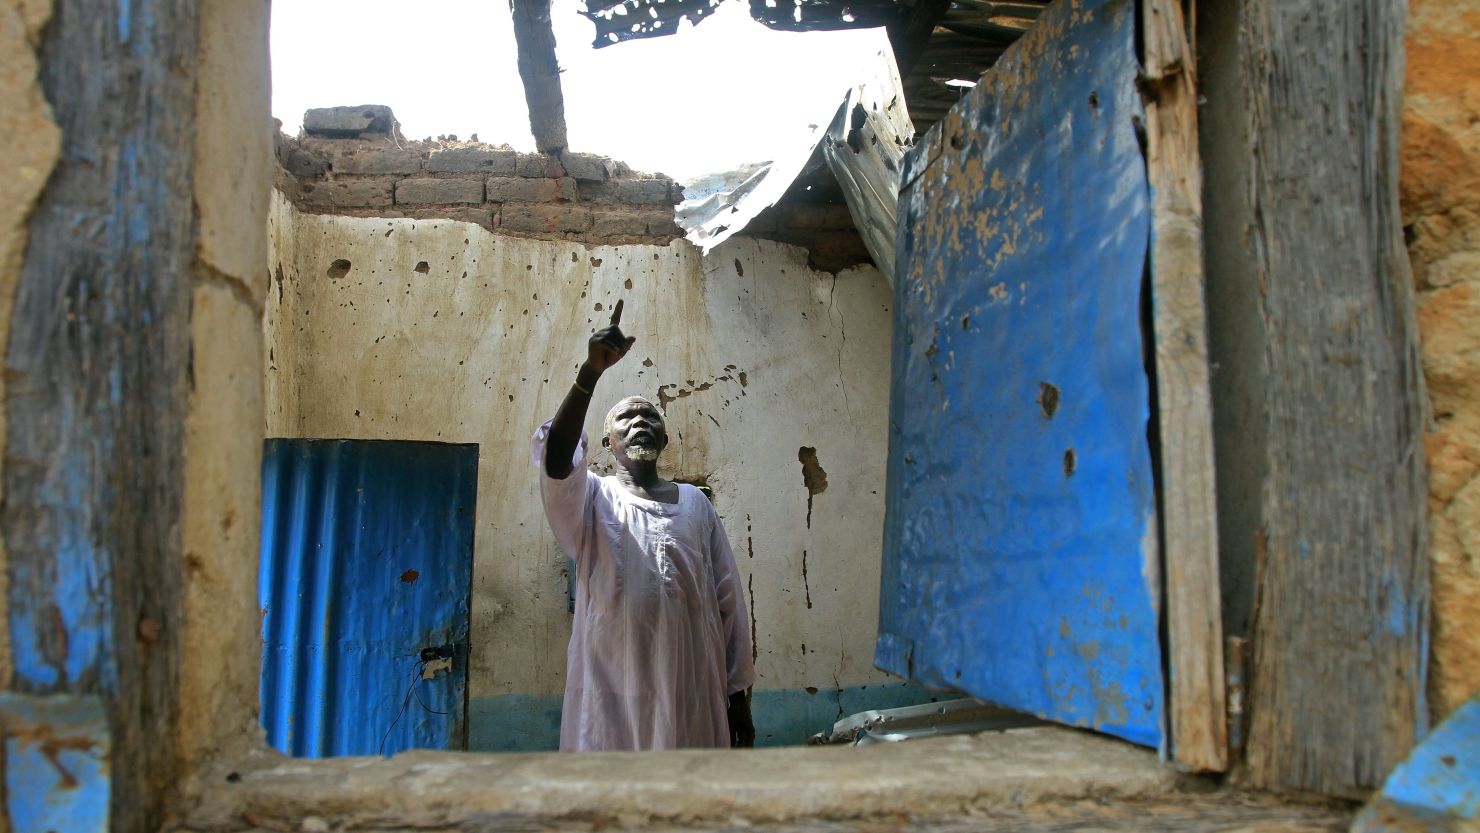 A Sudanese man surveys damages last month at his house caused by fighting in the border region of South Kordofan.